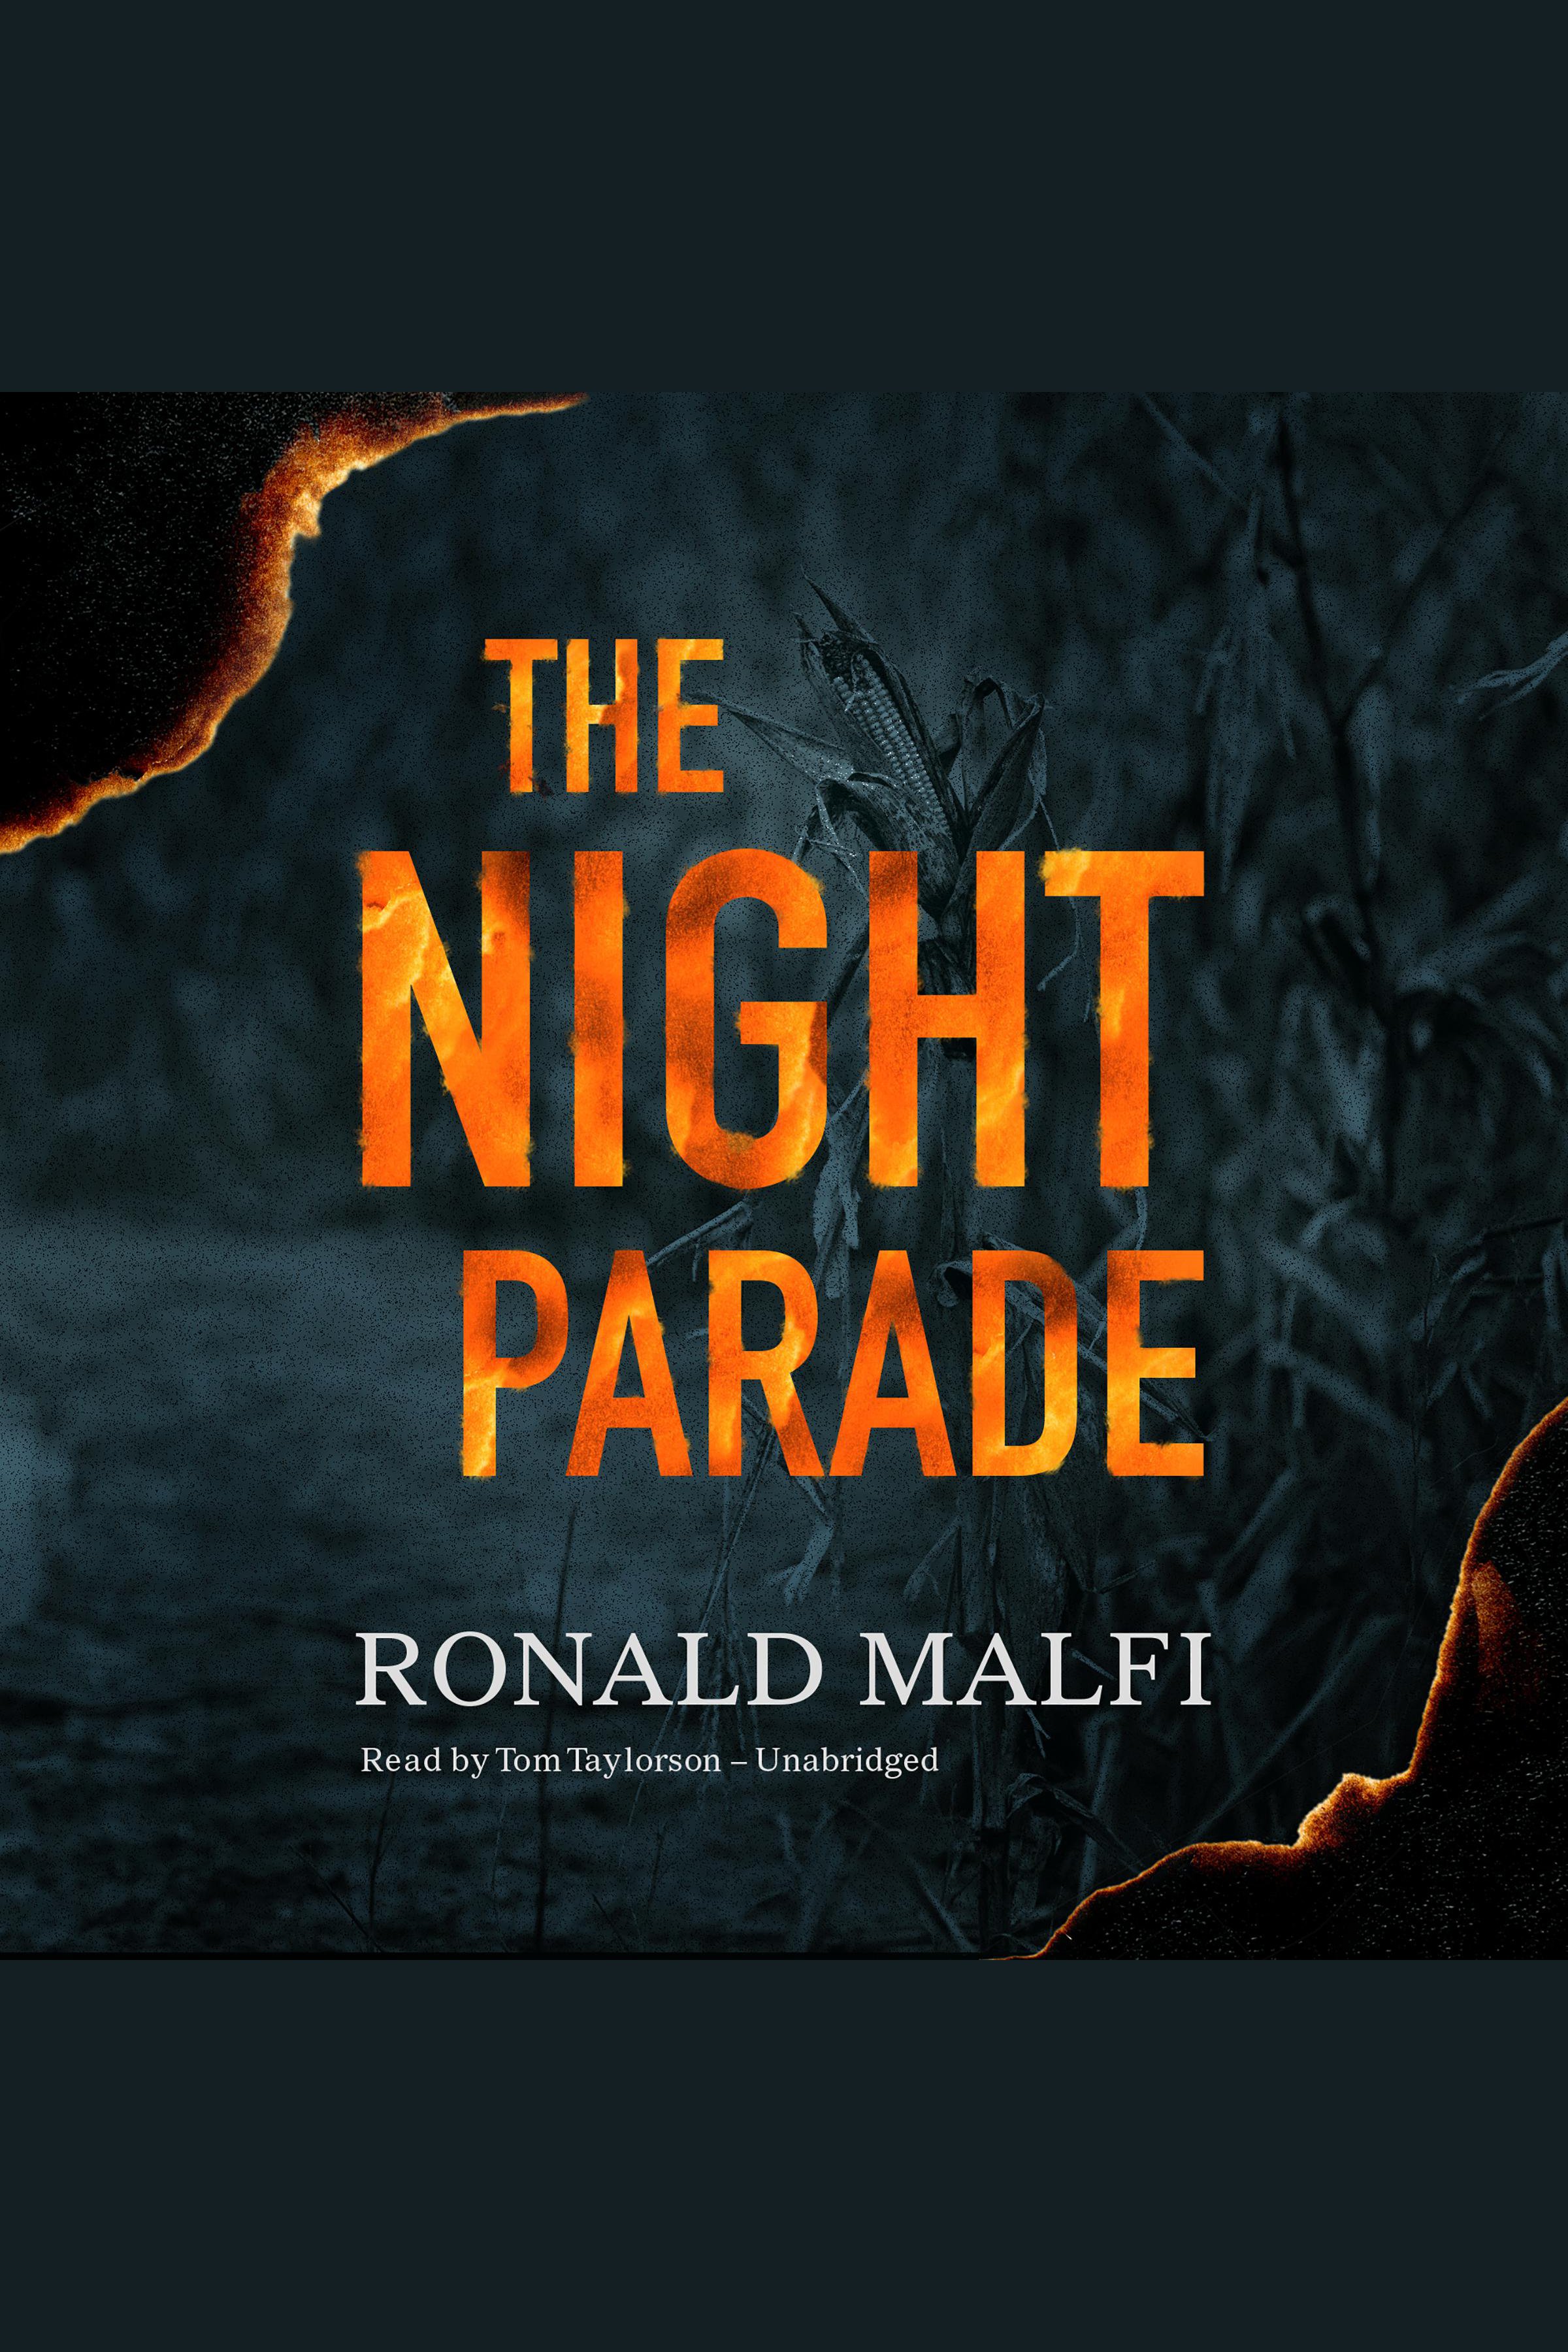 The Night Parade cover image